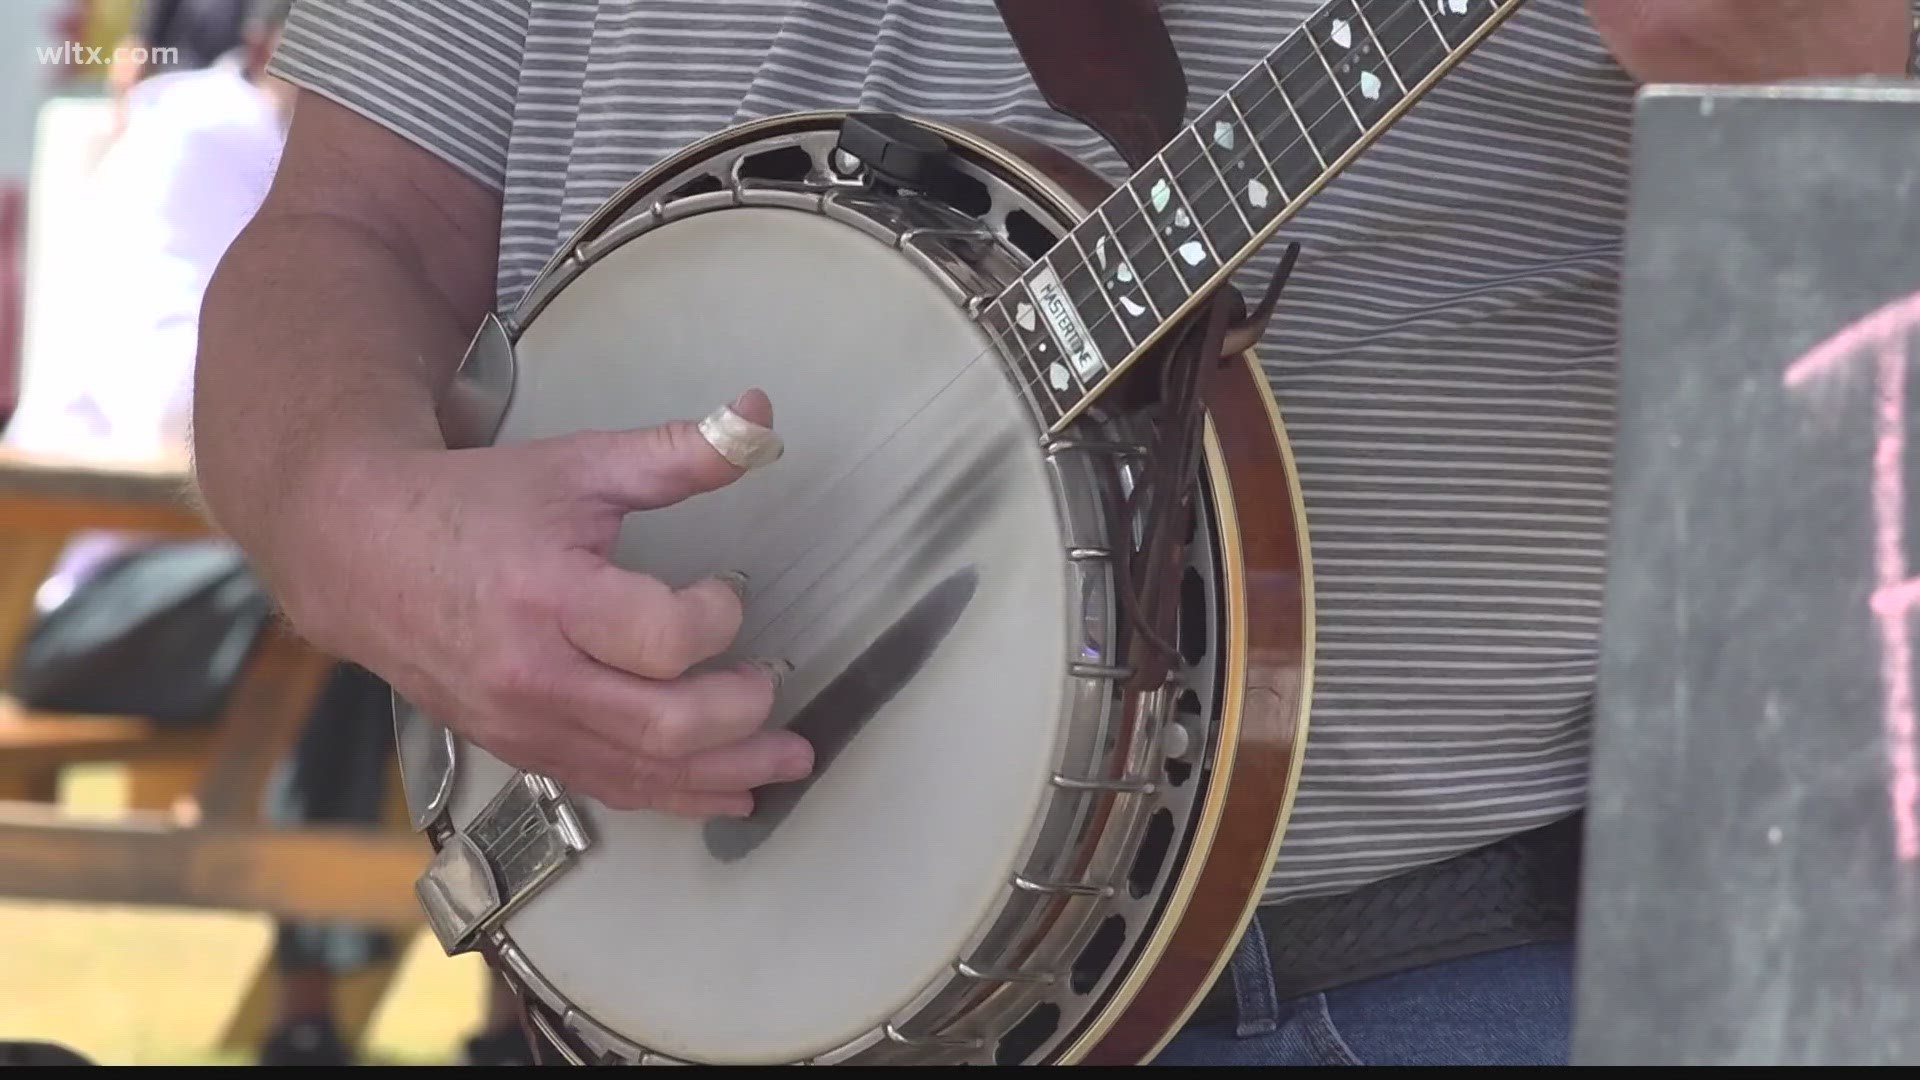 The Flatland Express Bluegrass Band is sharing their traditional "mountain music" at the South Carolina State Fair.